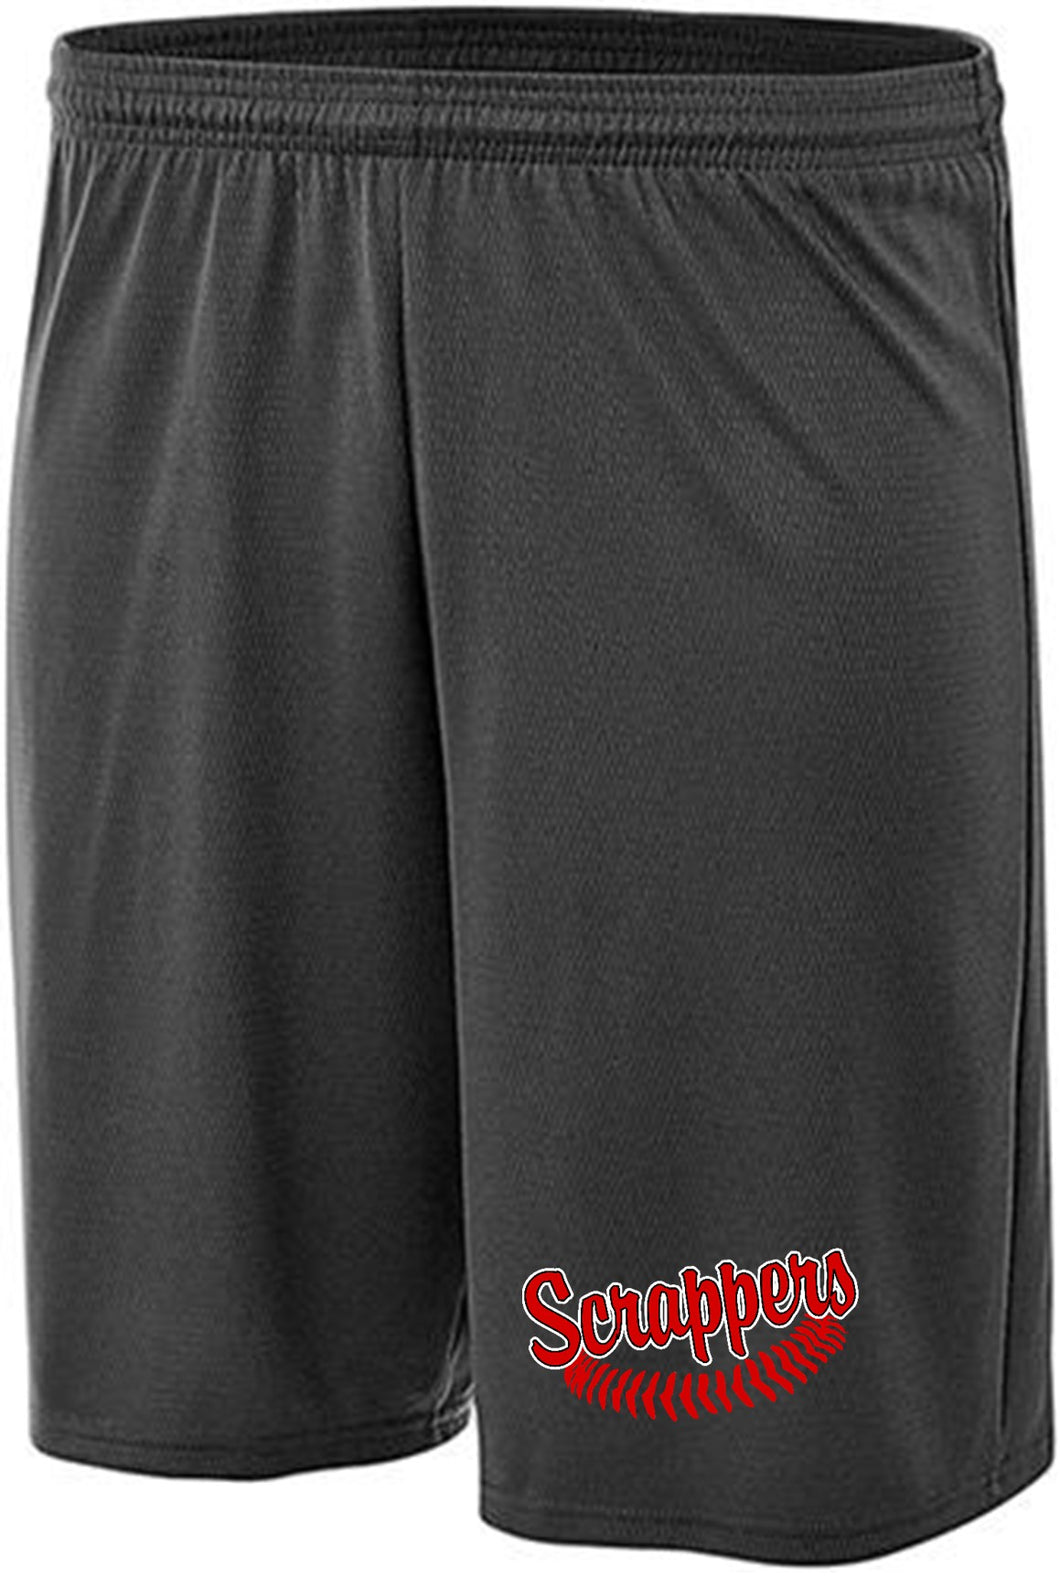 Scrappers Baseball Shorts (Youth and Adult)